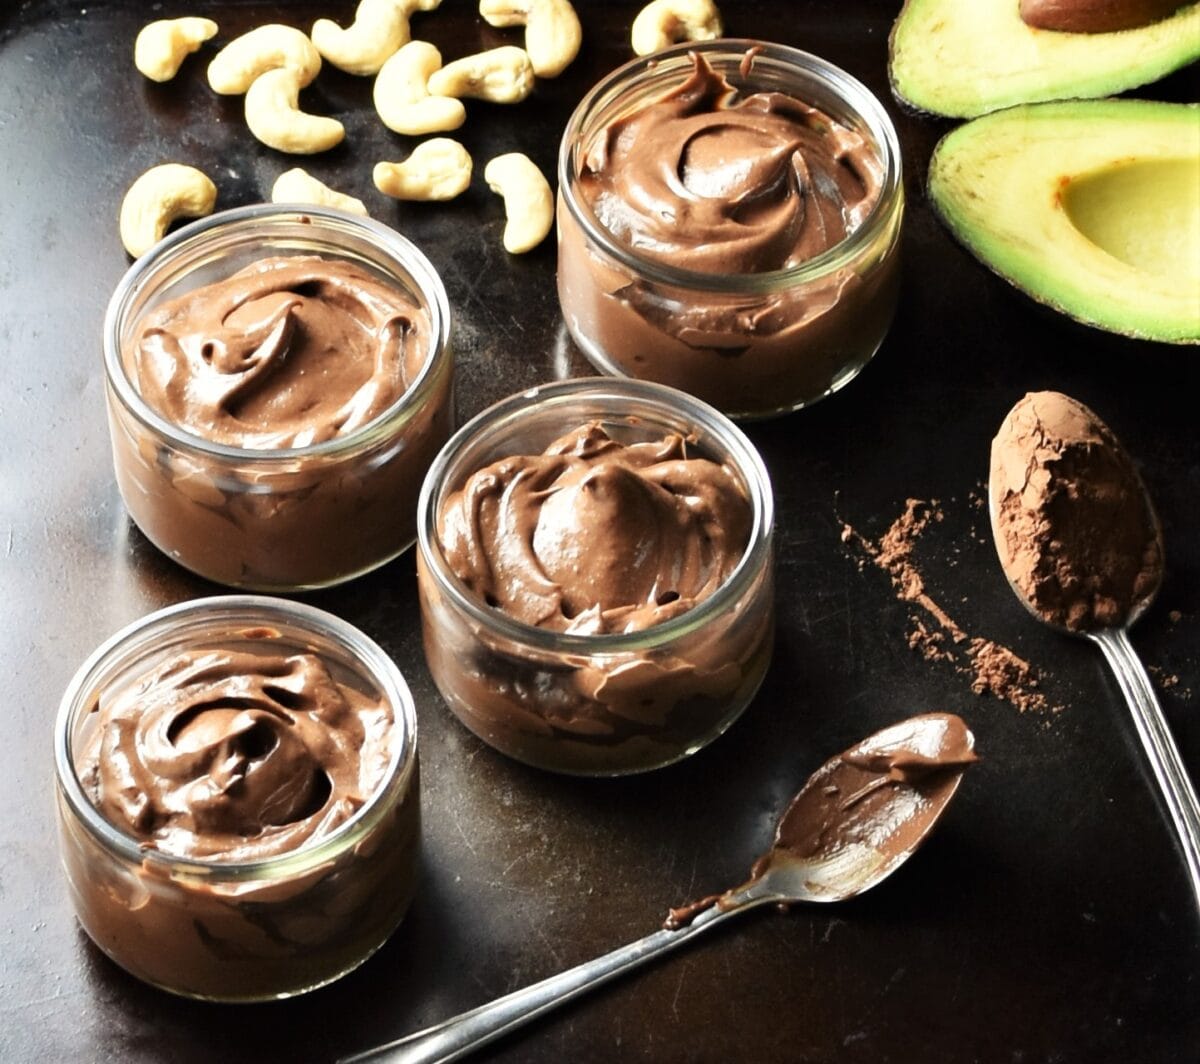 Healthy chocolate avocado mousse in 4 round pots, 2 spoons with cocoa, cashew and halved avocado.